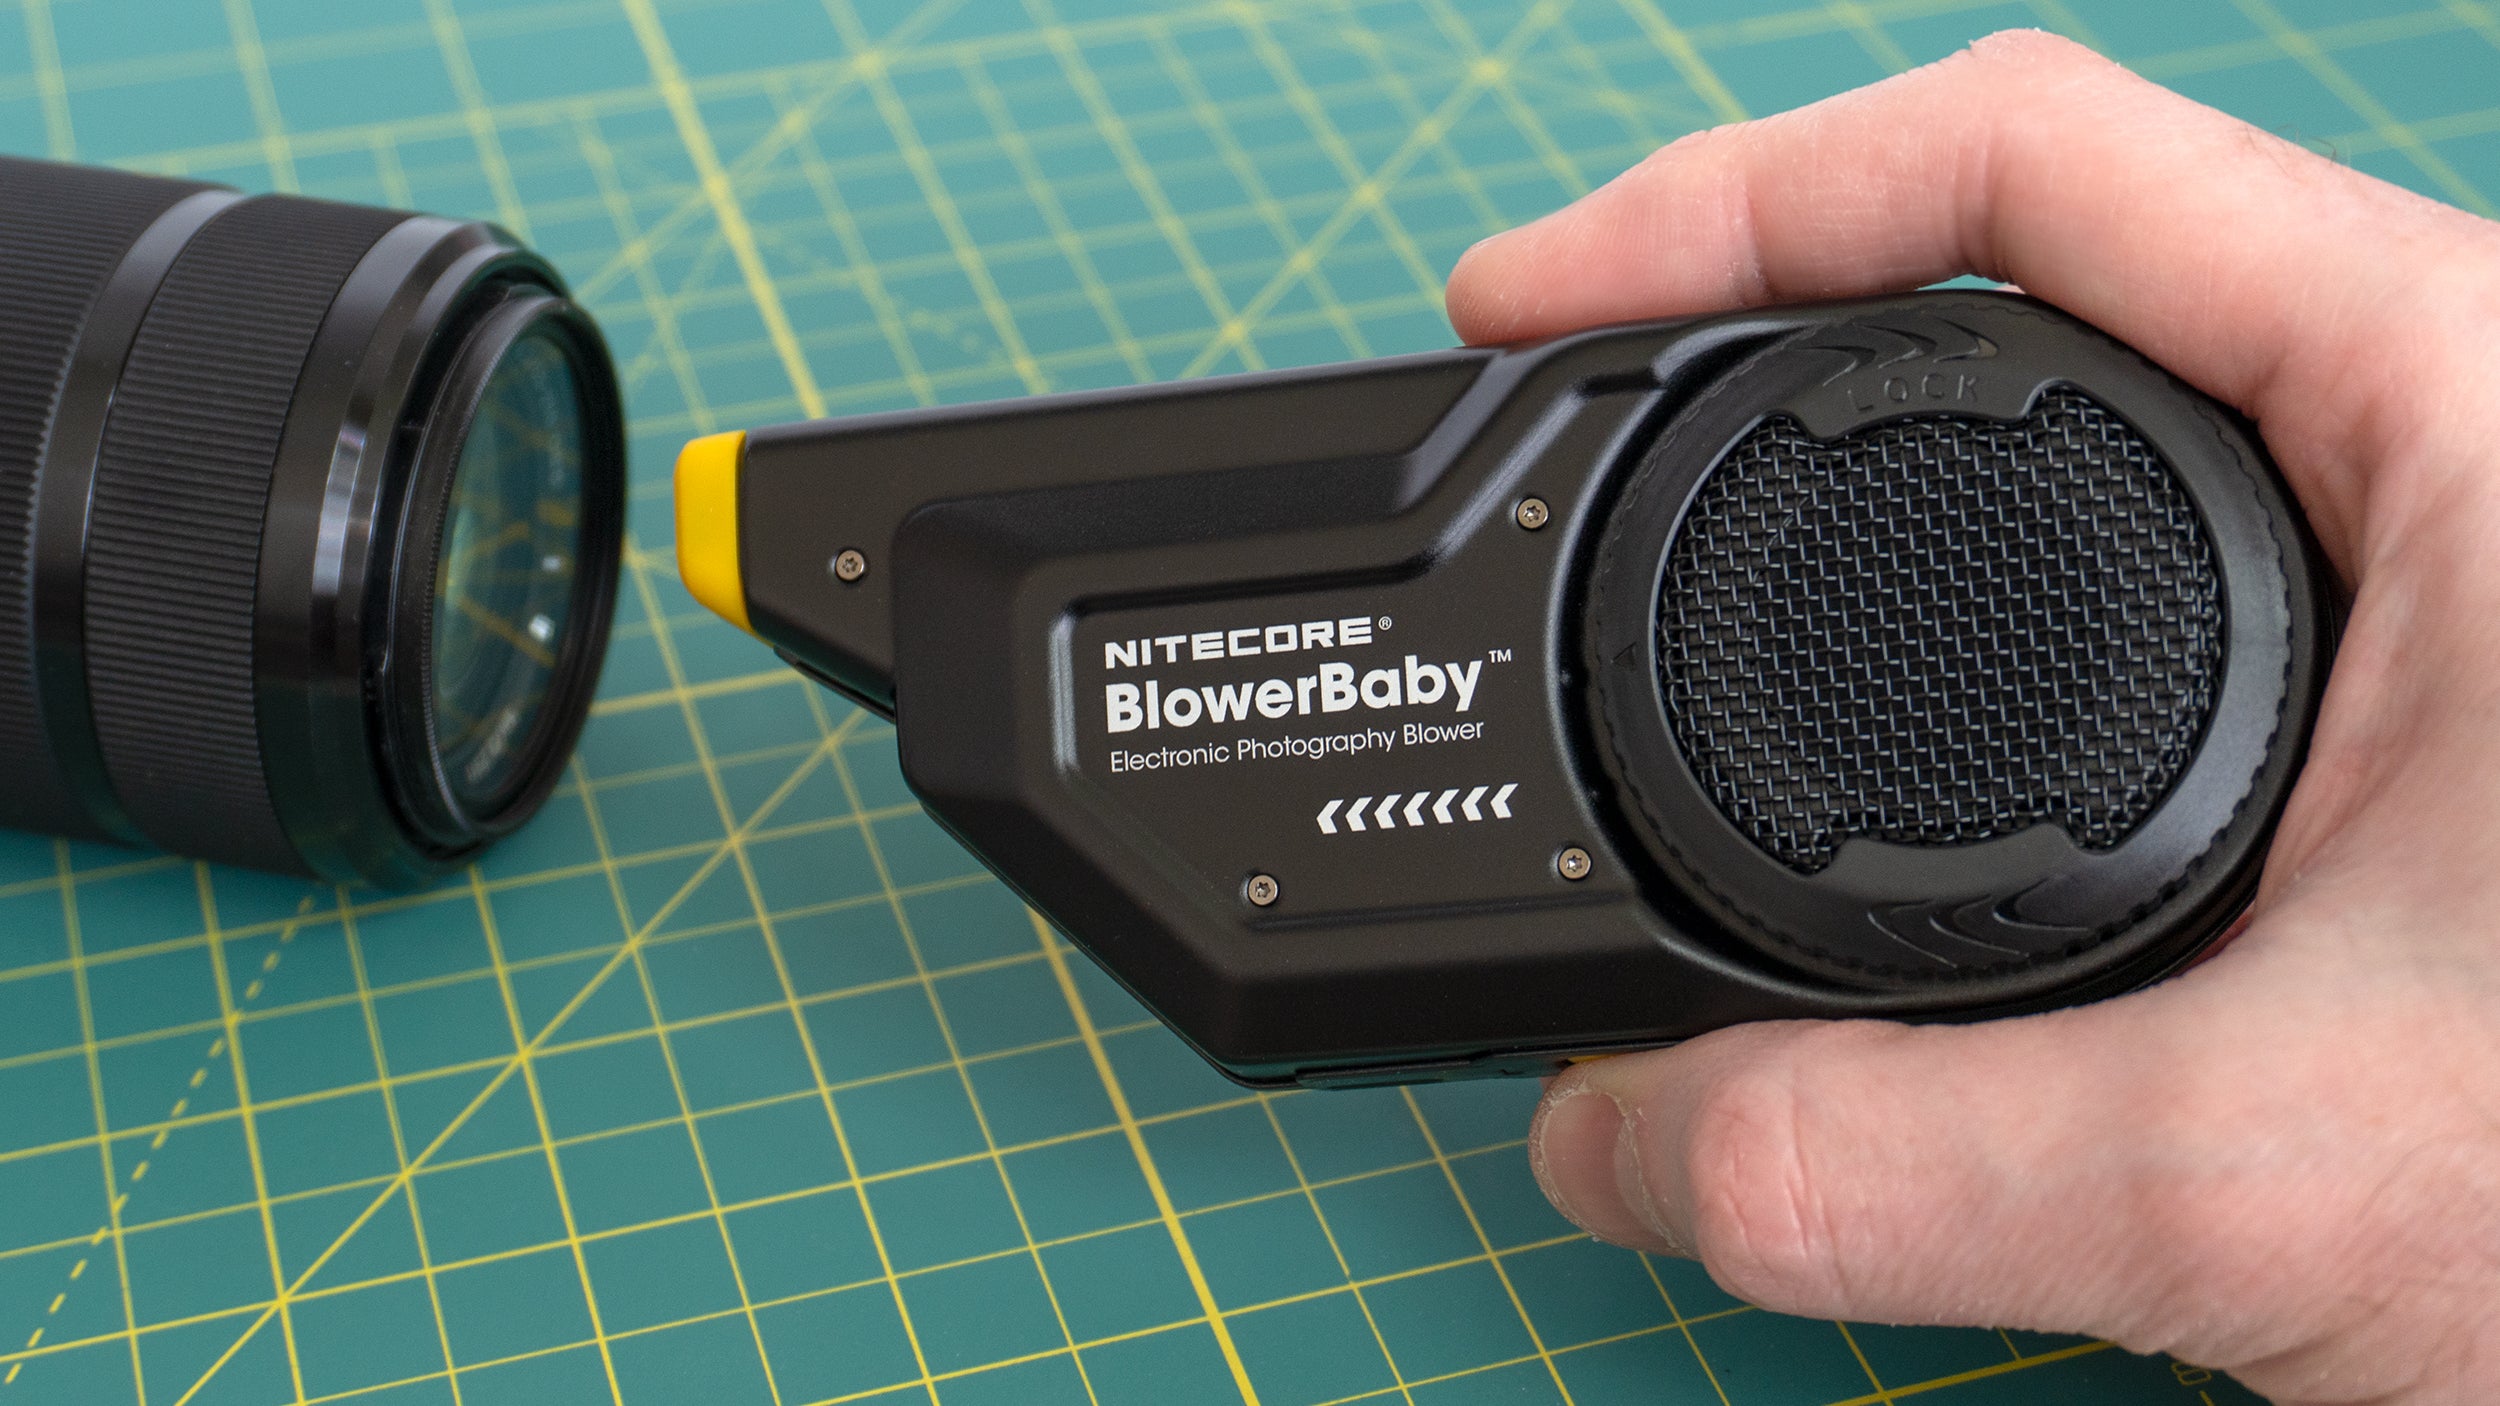 The BlowerBaby's aluminium body feels quite solid, and the device takes up less room in a camera bag than many other alternatives. (Image: Andrew Liszewski | Gizmodo)